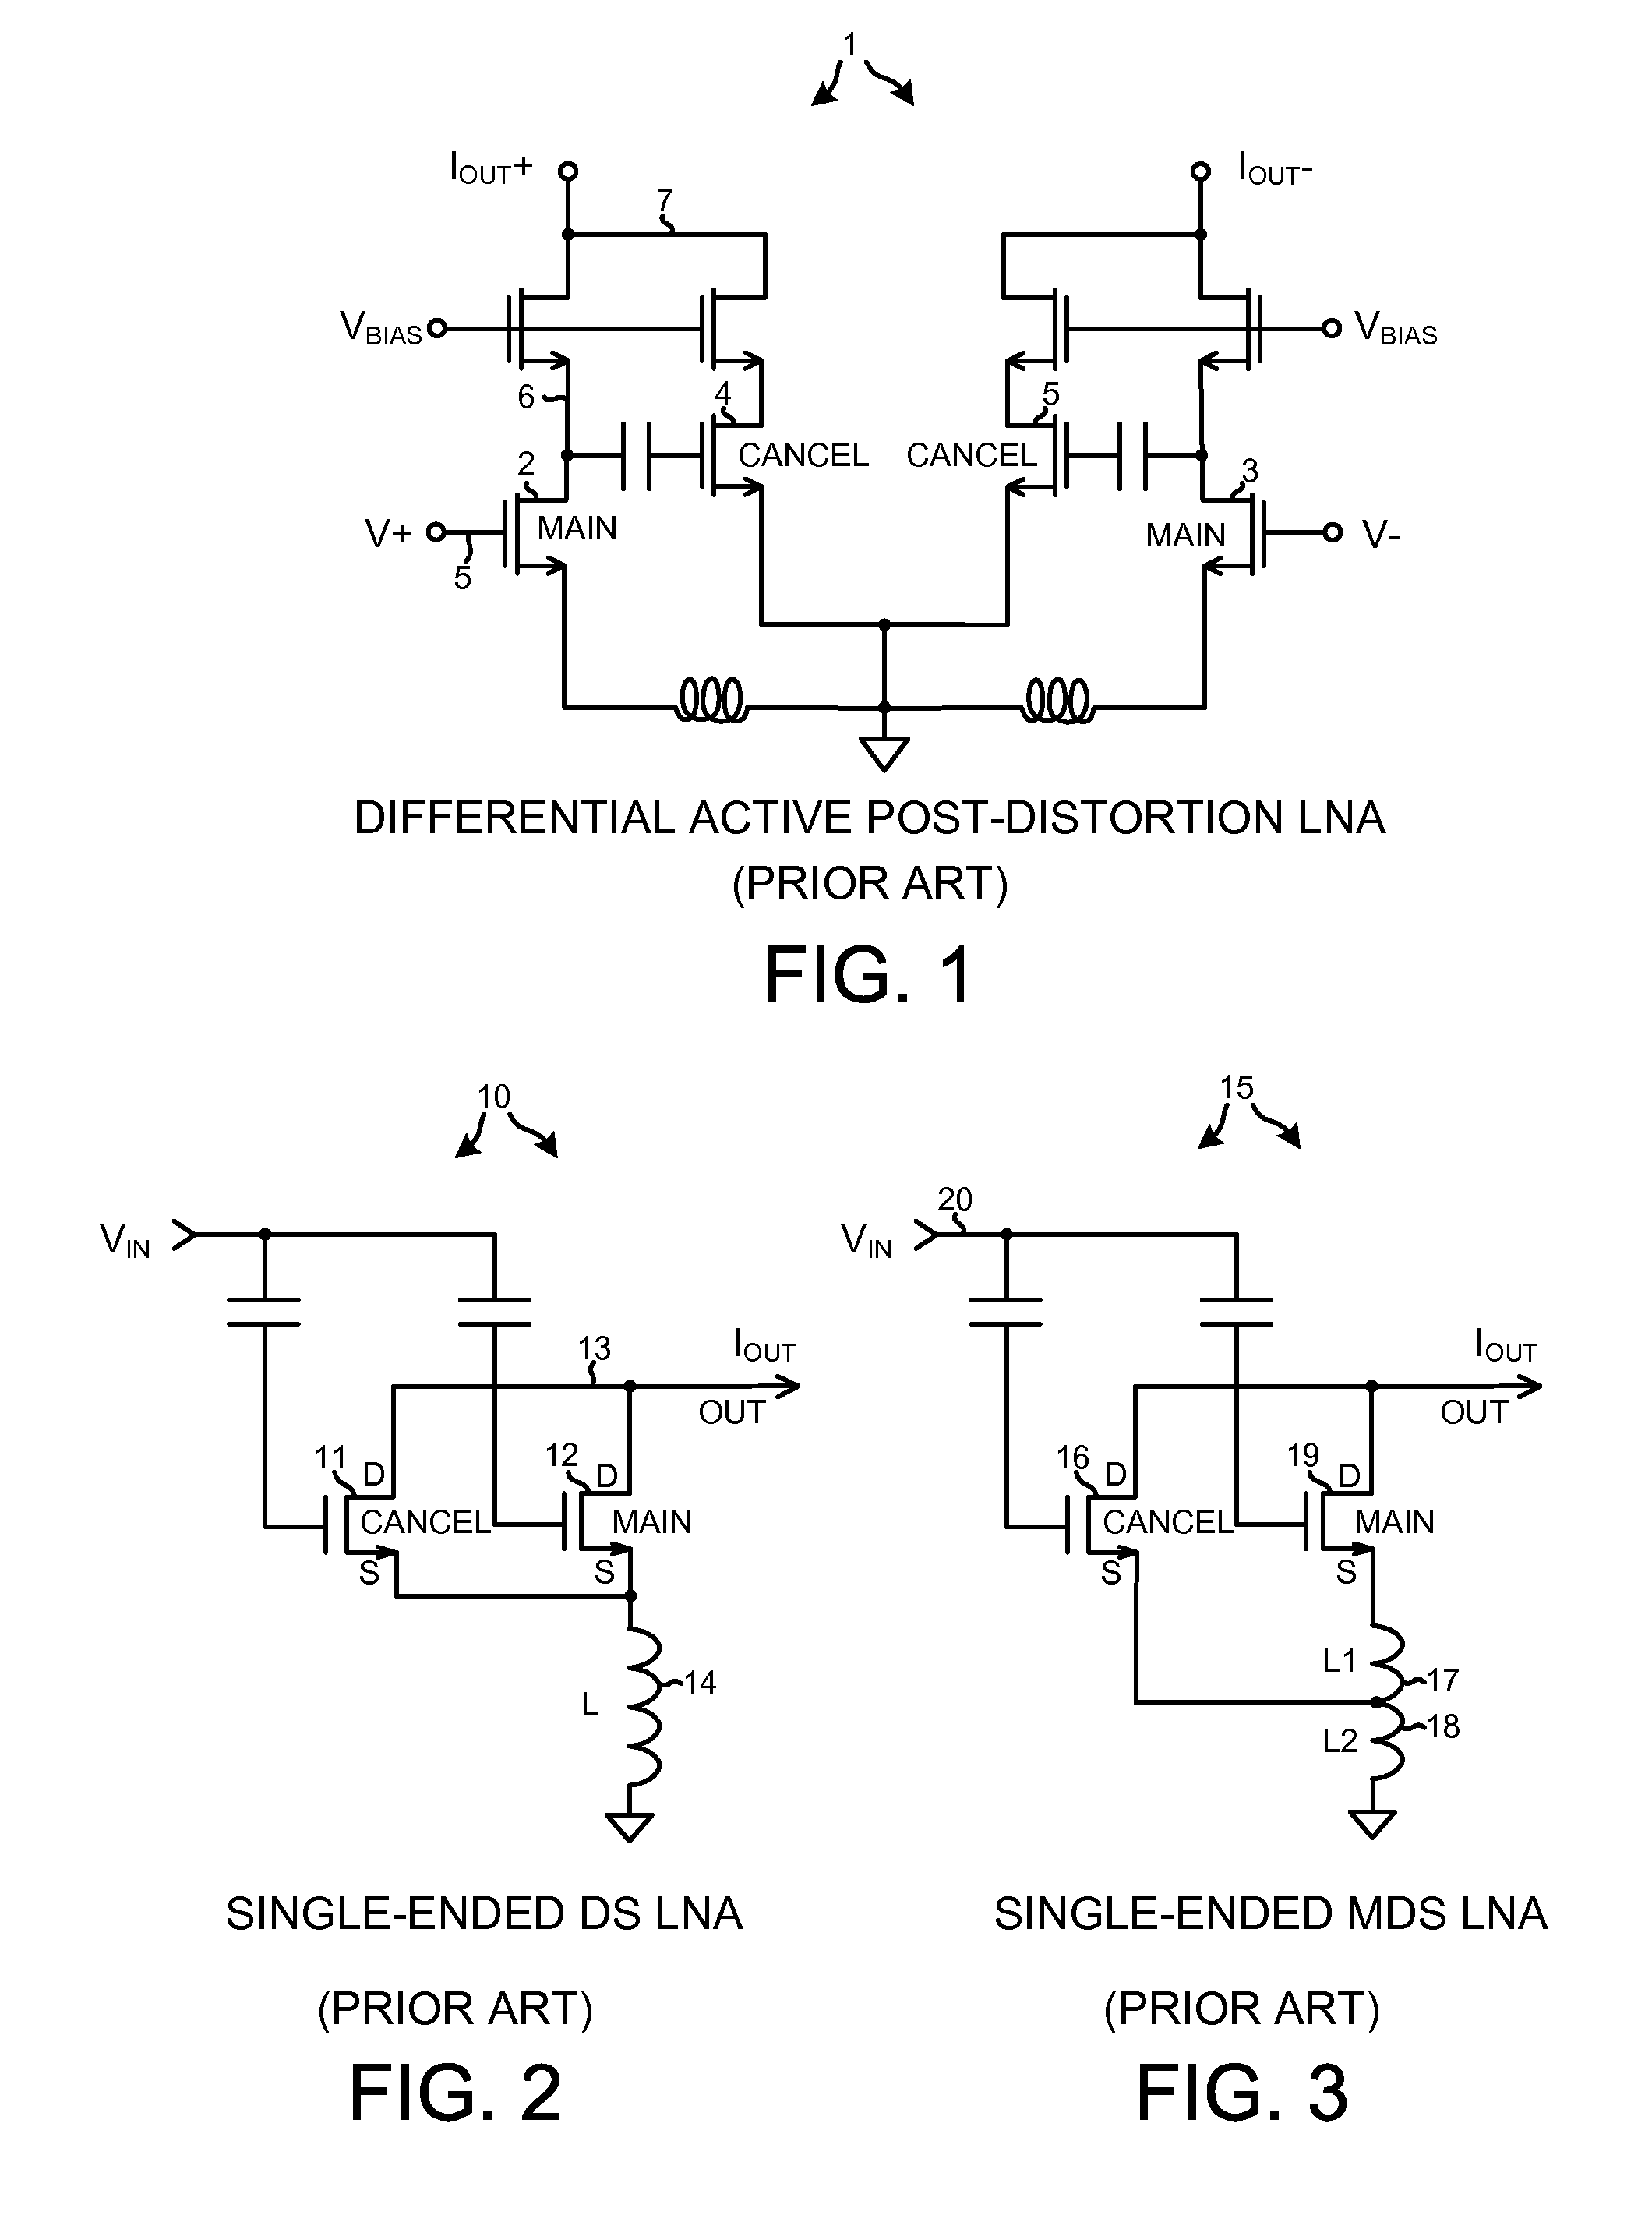 Low noise and low input capacitance differential mds lna